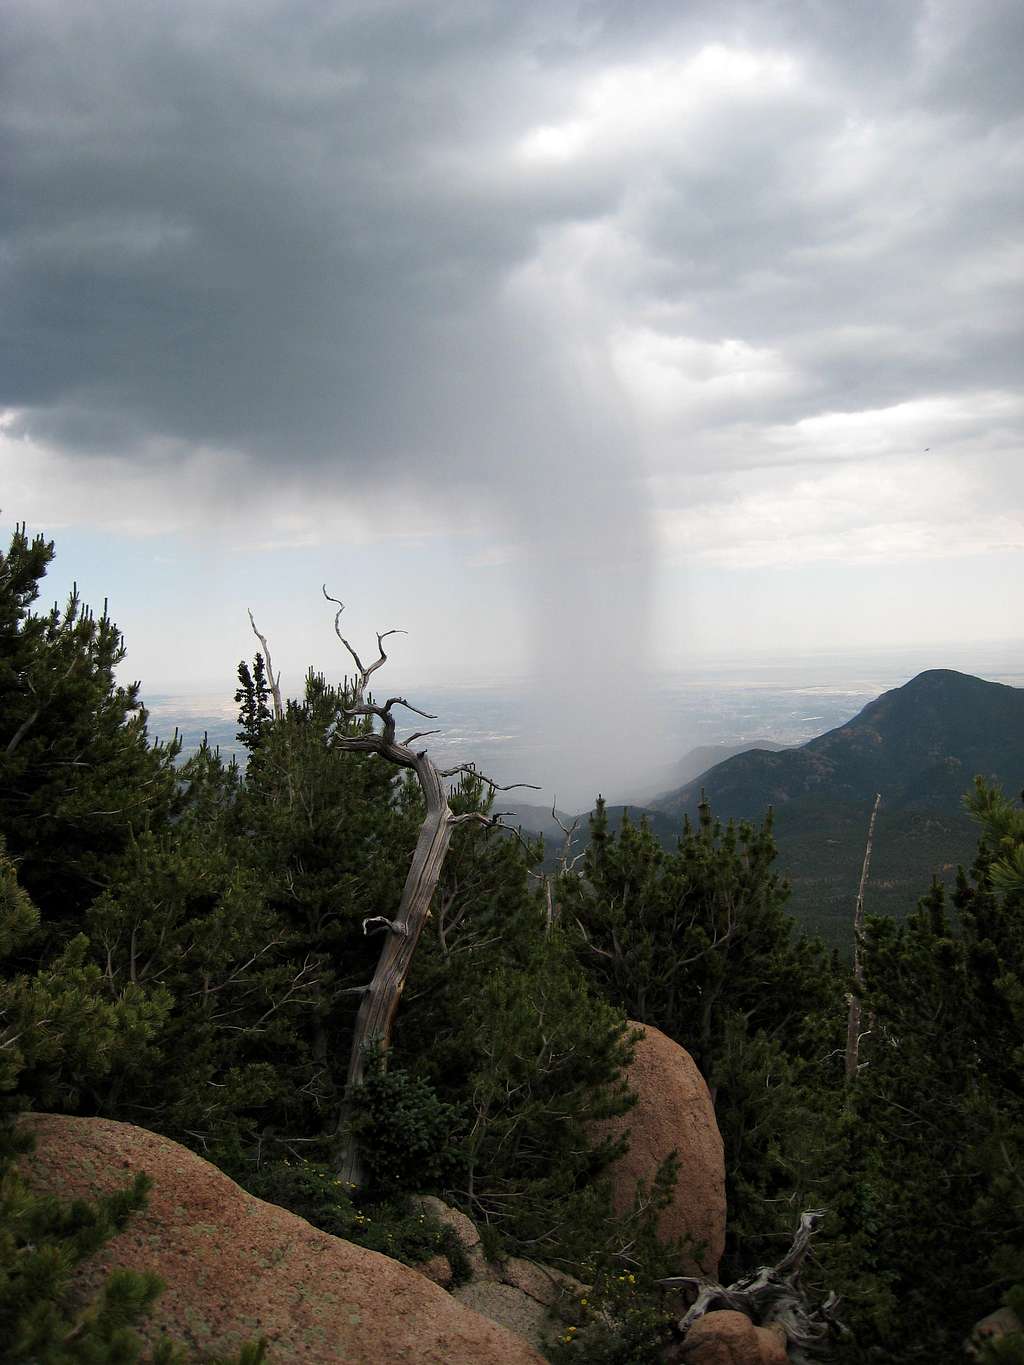 Storm approaching Pikes Peak